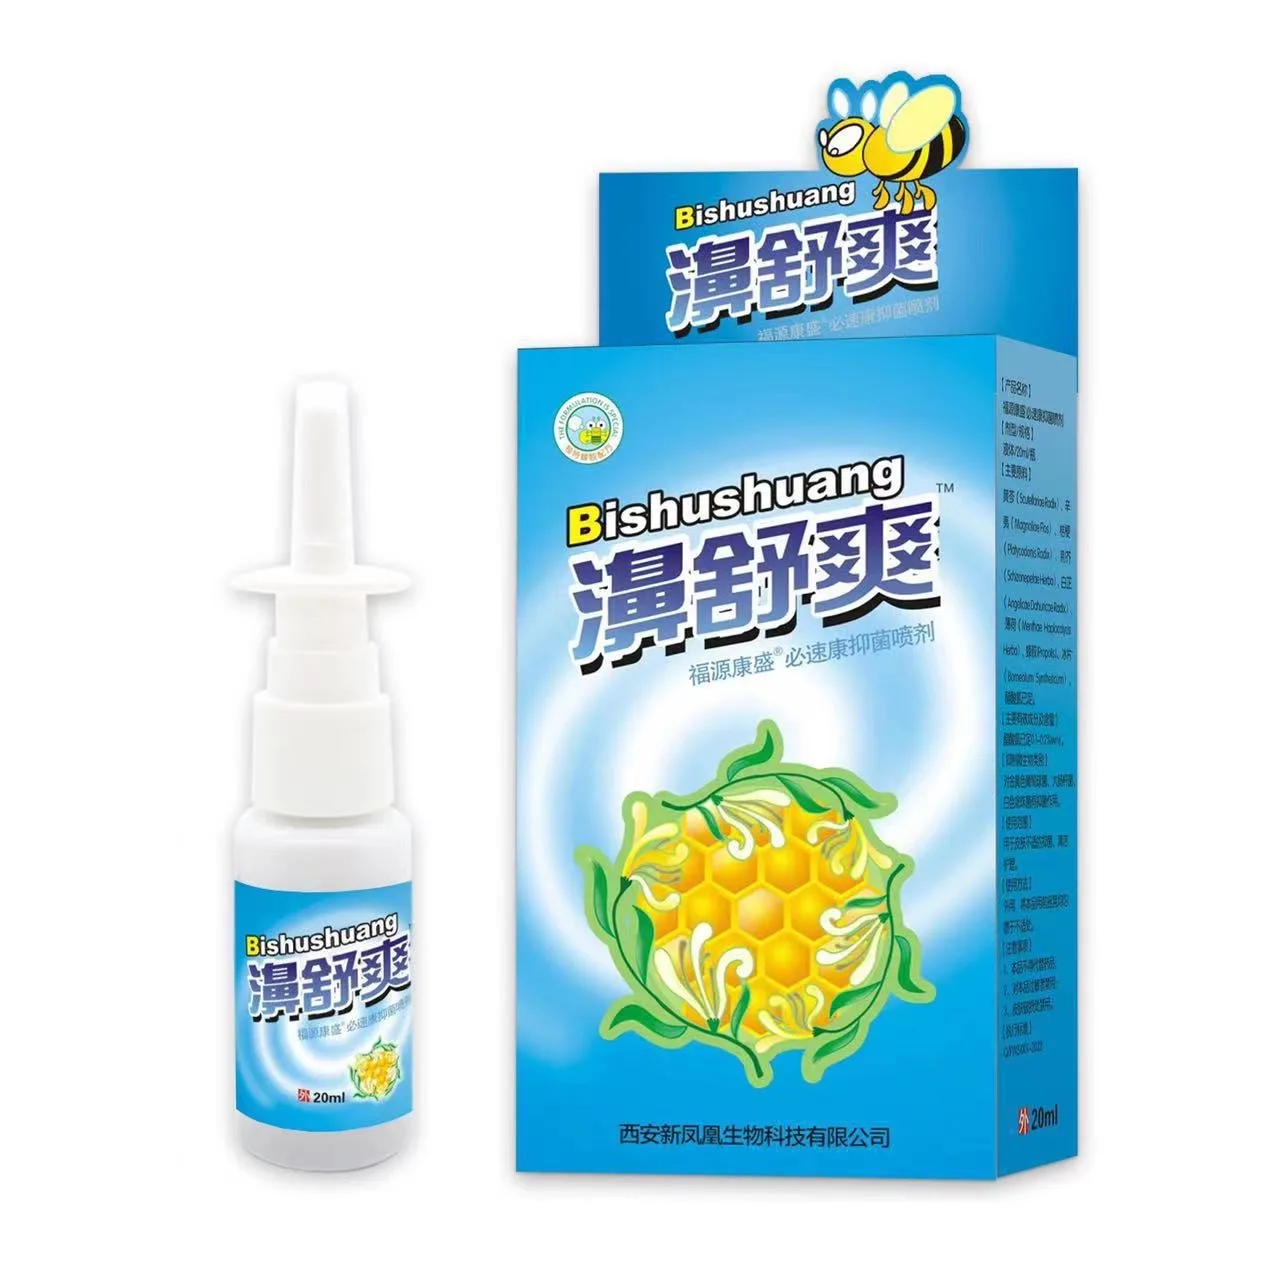 

2PCS Silver Ion Propolis Nose Spray For Rhinitis Sinusitis Caused By Colds Sneezing Runny Nose Drops Goods For Health Care